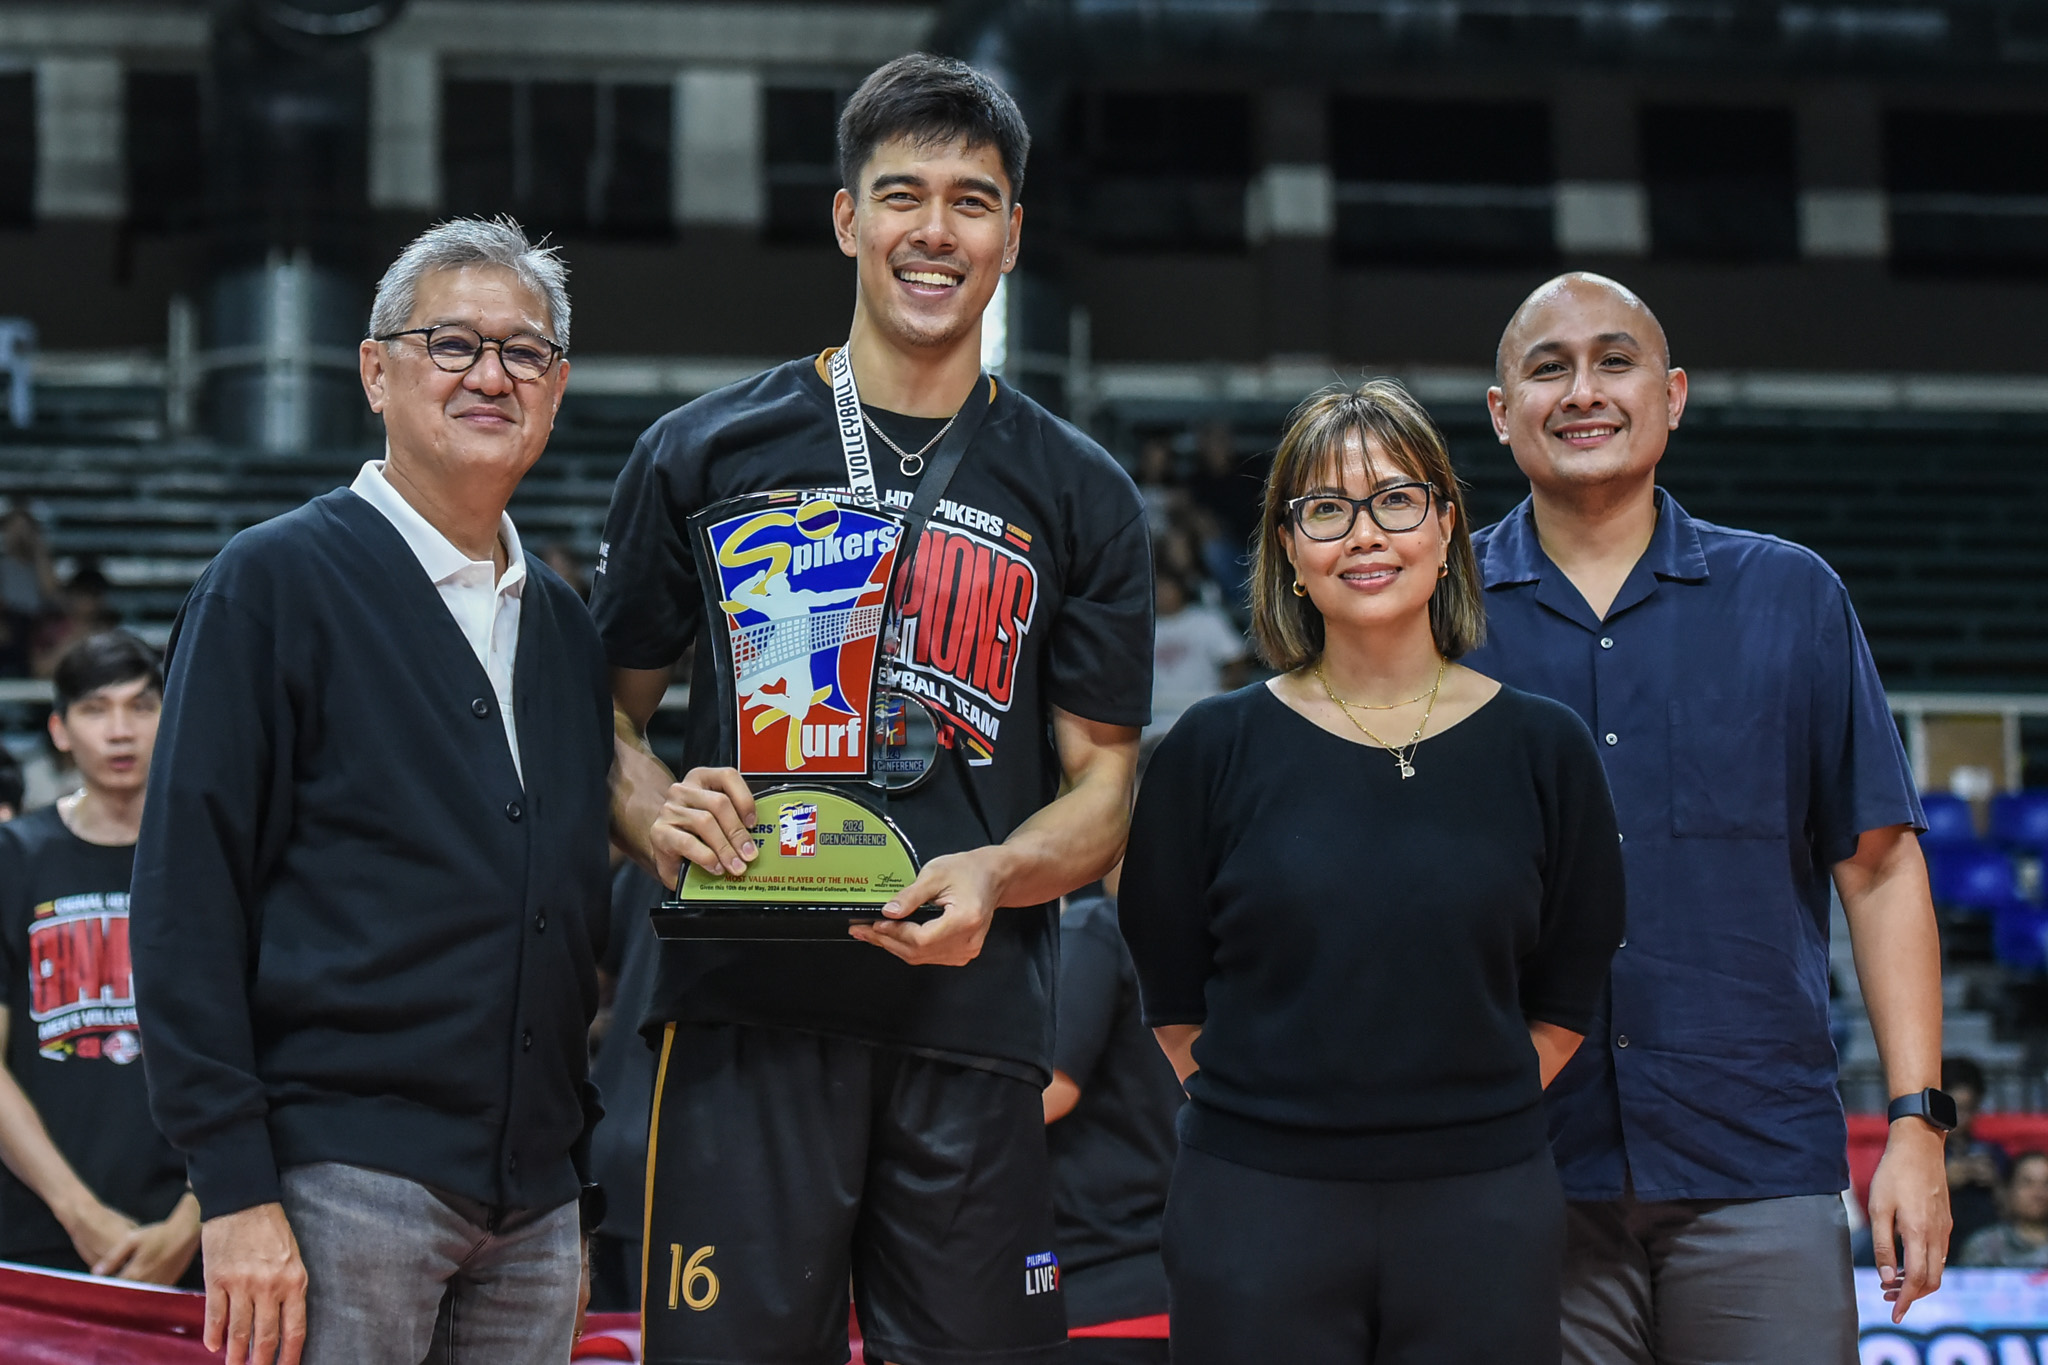 Bryan Bagunas relishes winning title in home soil again